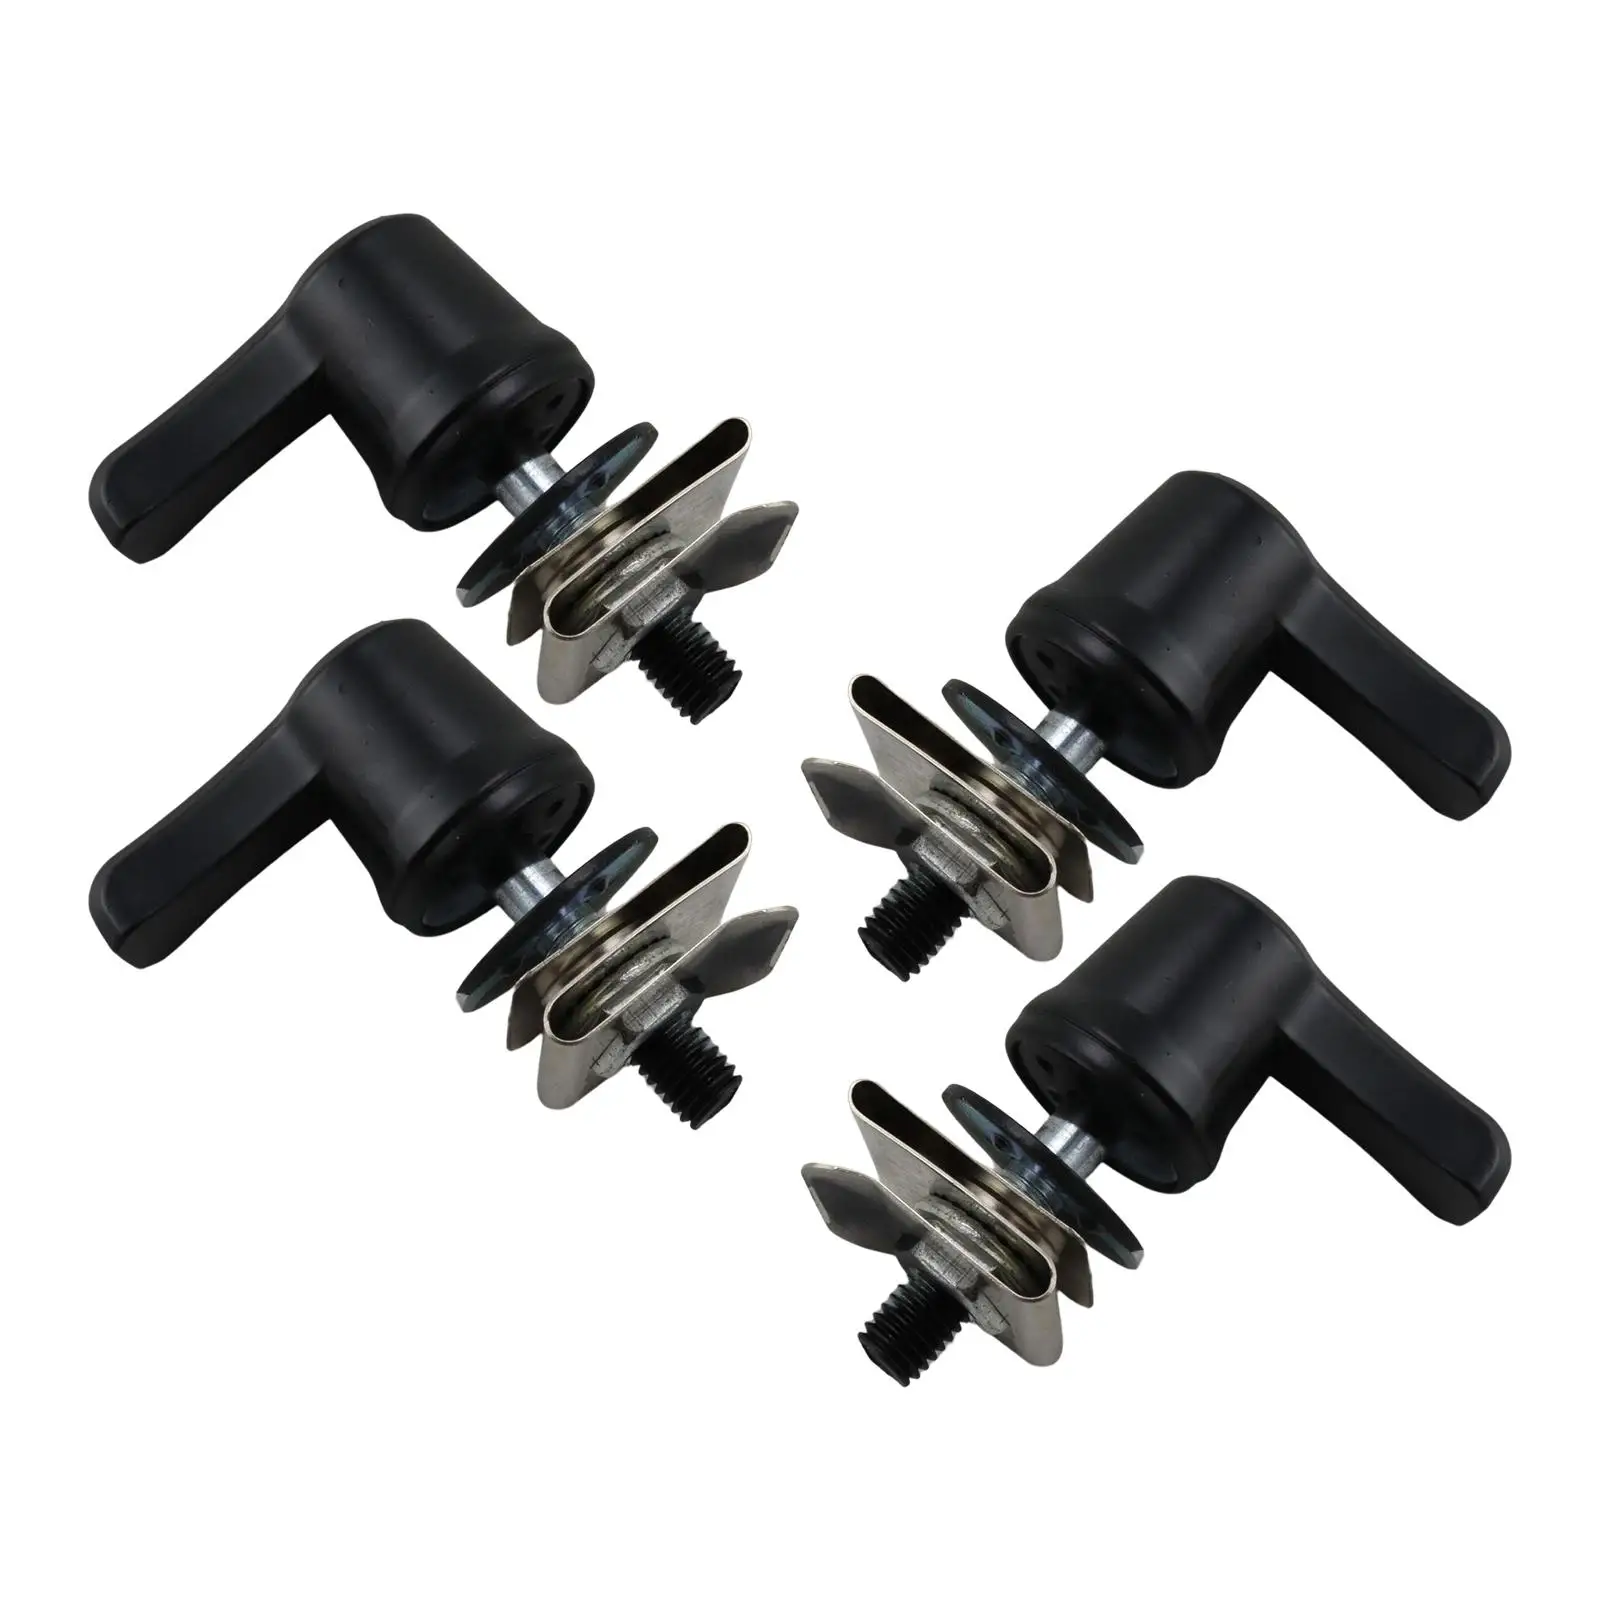 4Pcs 90201540 Saddlebag Mounting Hardware Replacement Bolt Screw Fastener for Touring Road Glide Motorbike Accessories